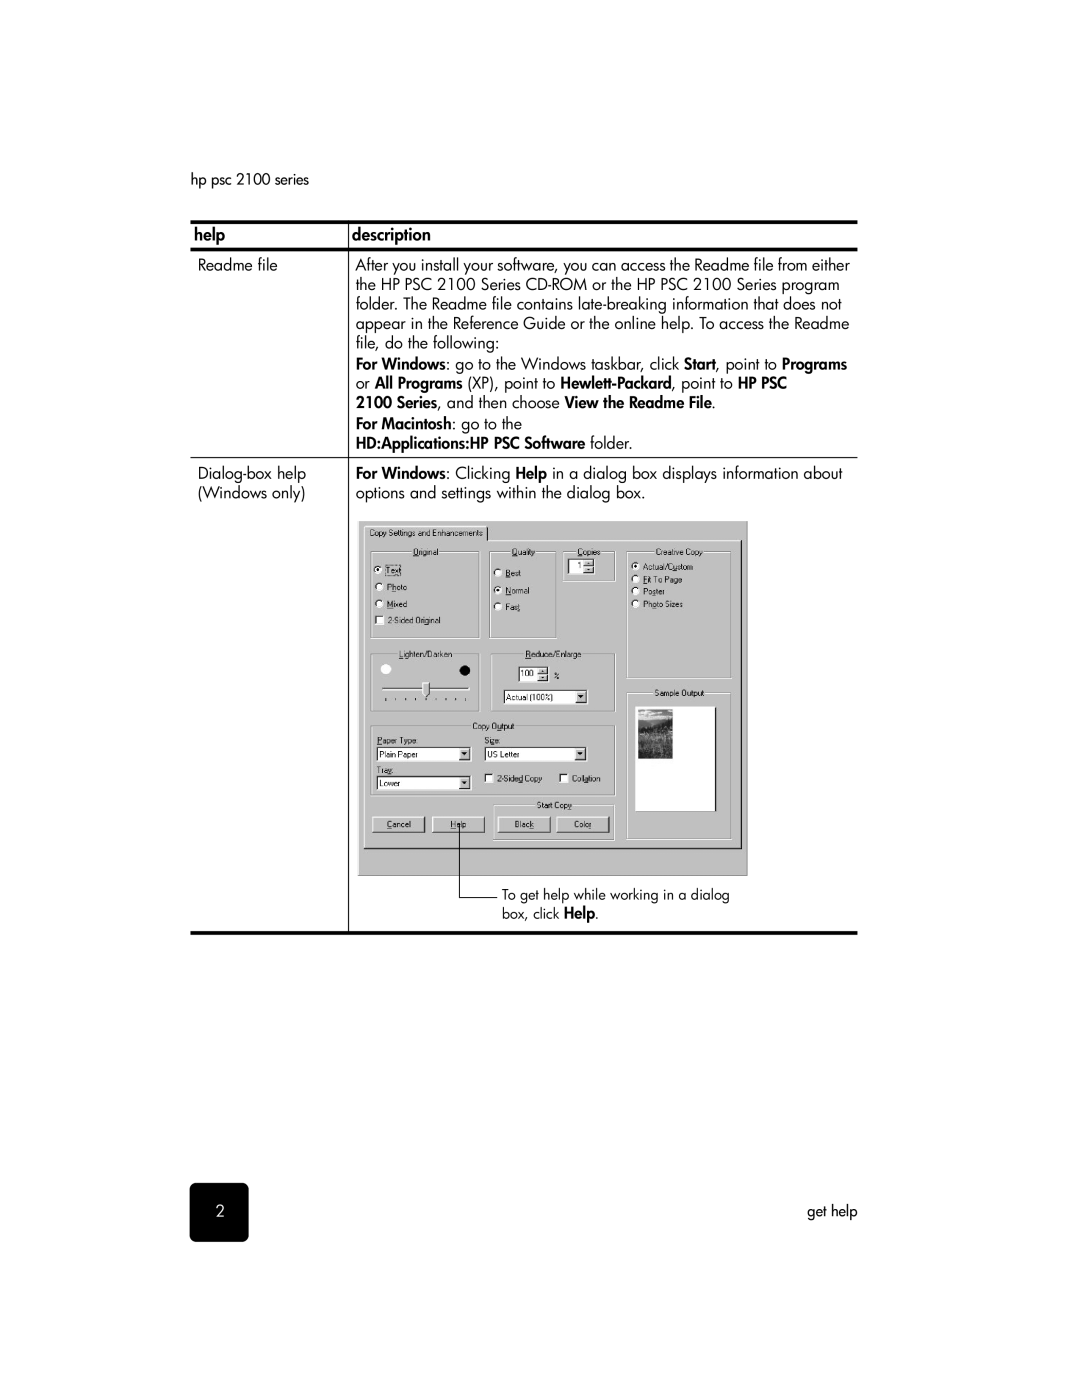 HP 2100 manual Readme file, File, do the following, Series, and then choose View the Readme File, For Macintosh go to 